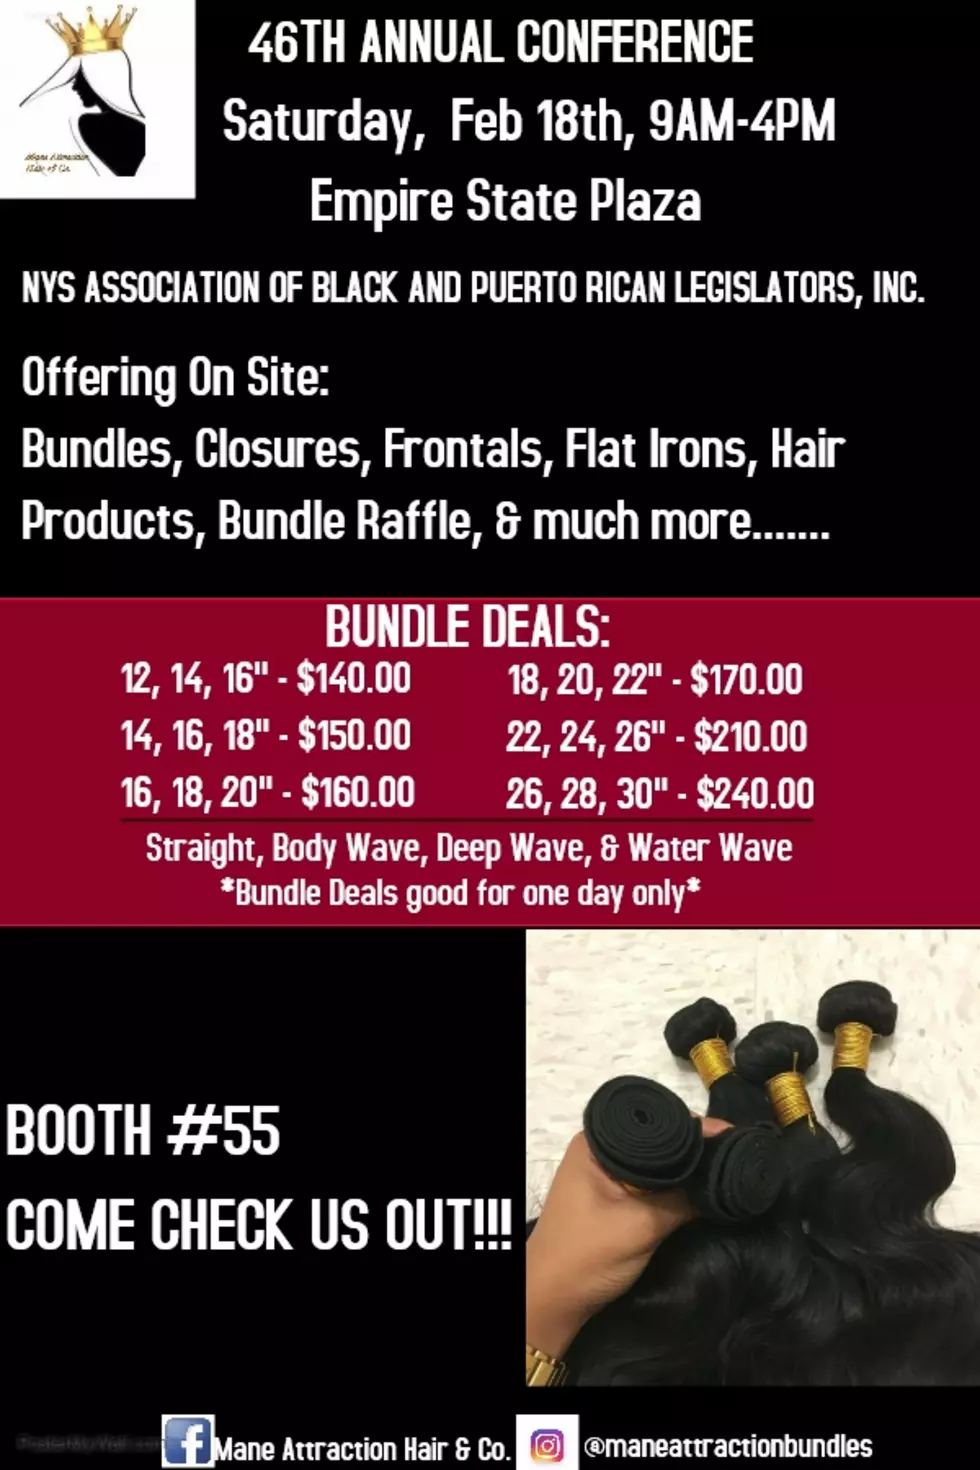 Stop by booth #55 at the Black and Puerto Rican Caucus